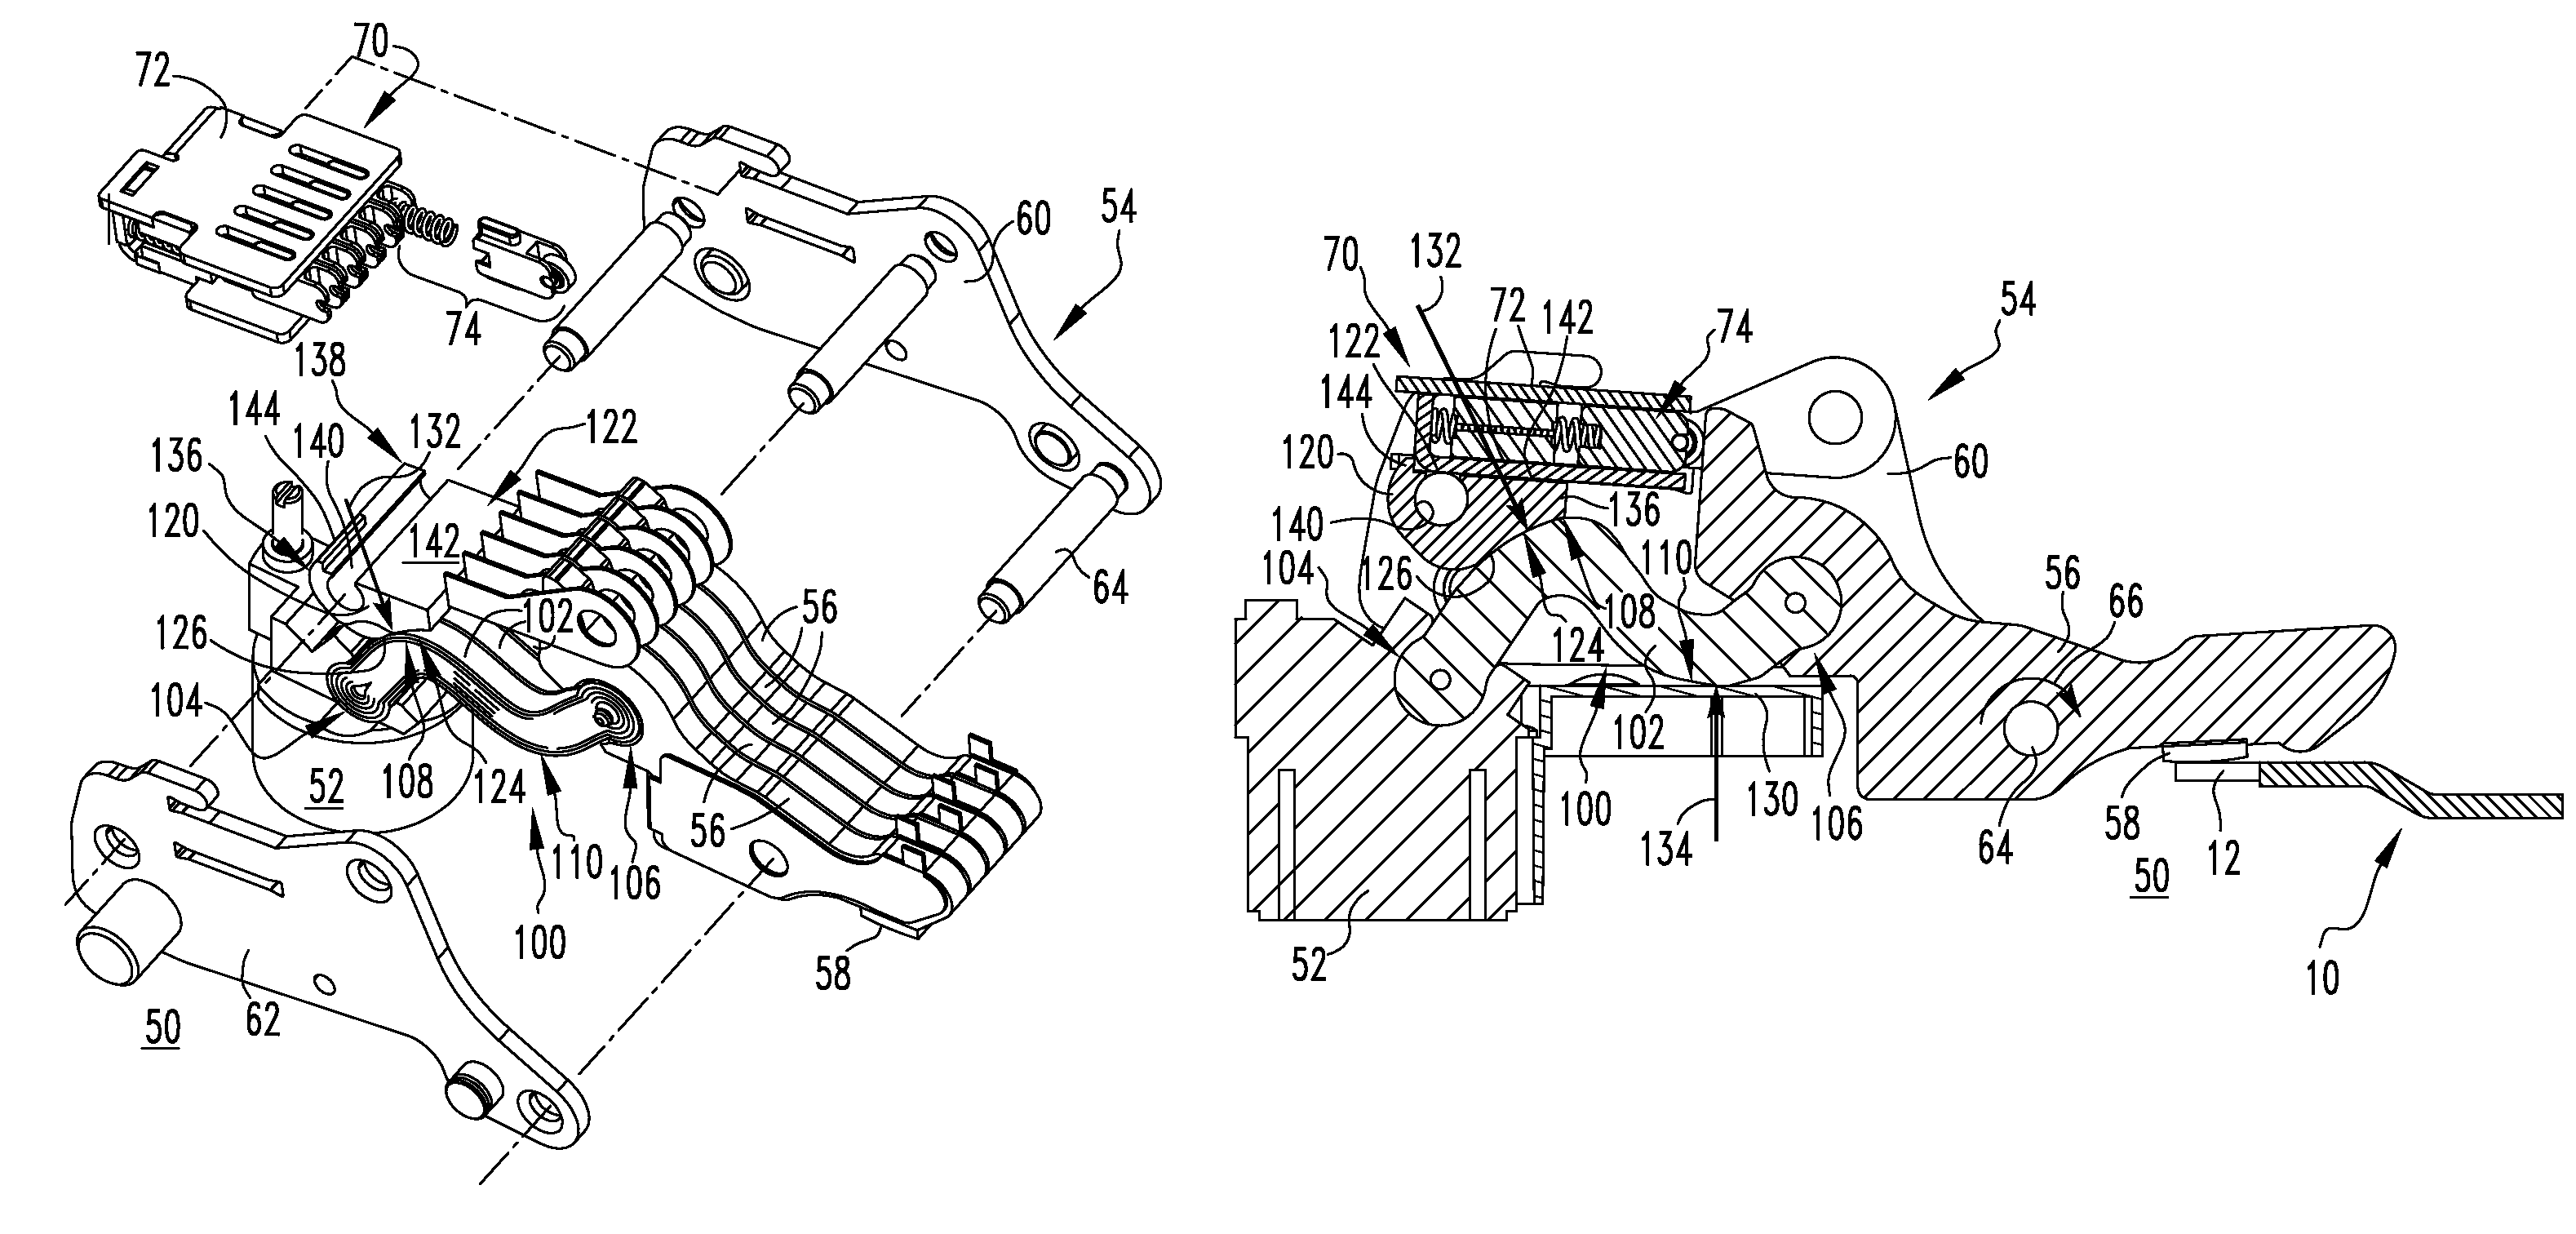 Electrical switching apparatus, and conductor assembly and shunt assembly therefor